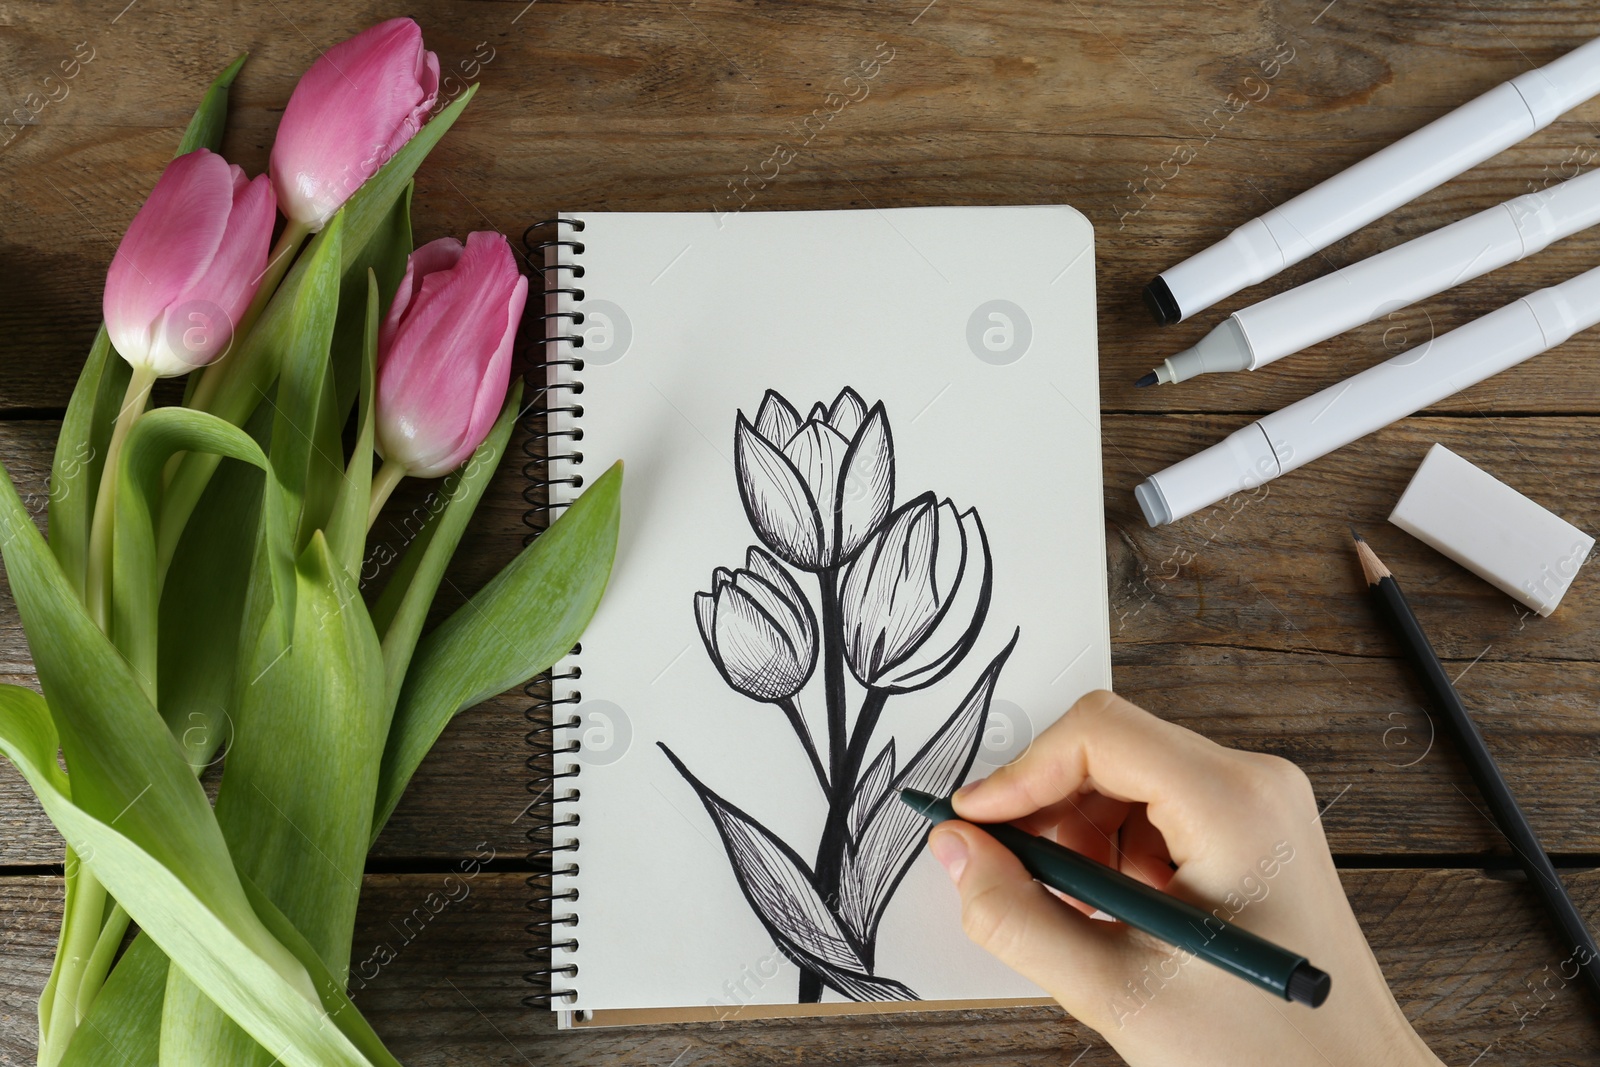 Photo of Woman drawing beautiful tulip flowers in sketchbook at wooden table, top view